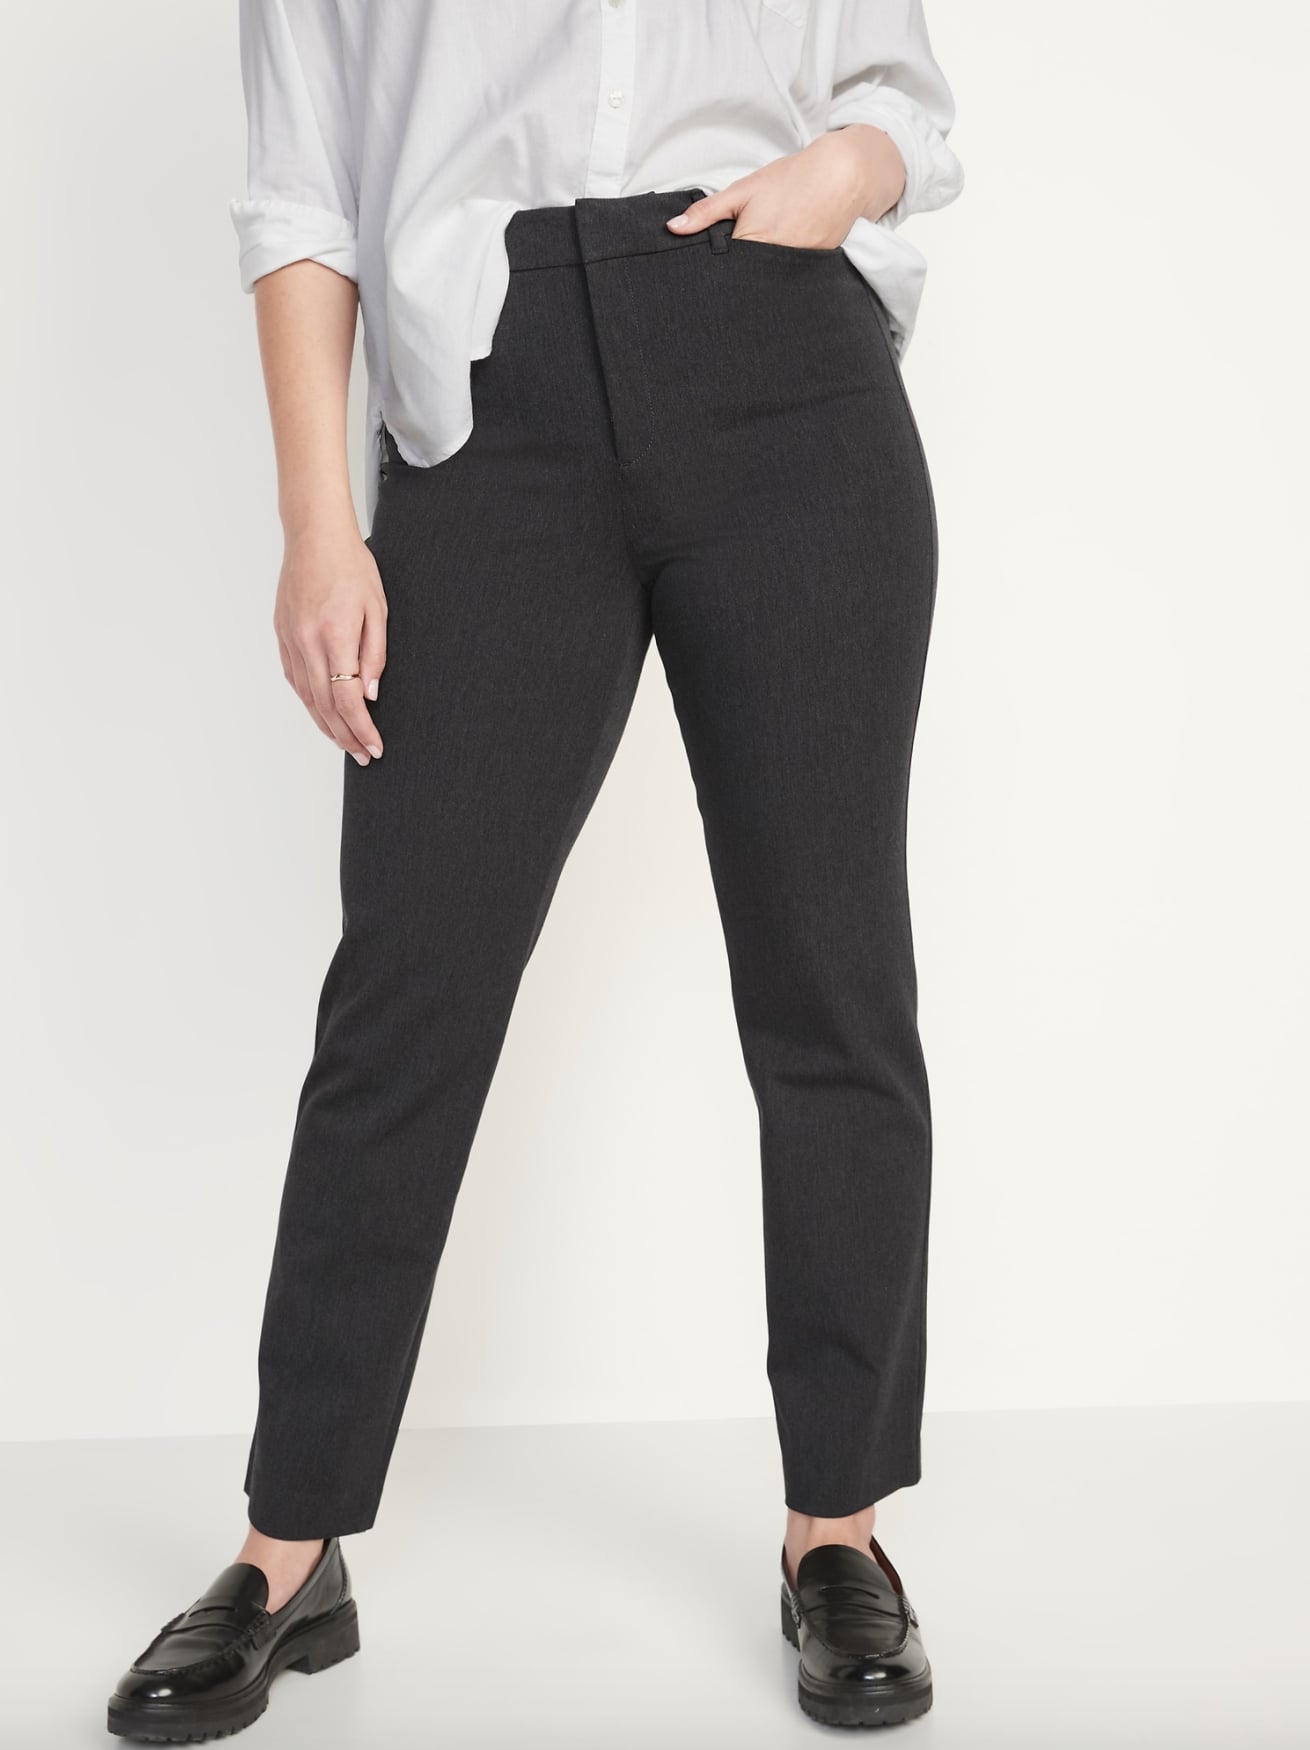 All About Fashion Stuff: Review: Old Navy Pixie Ankle Pants